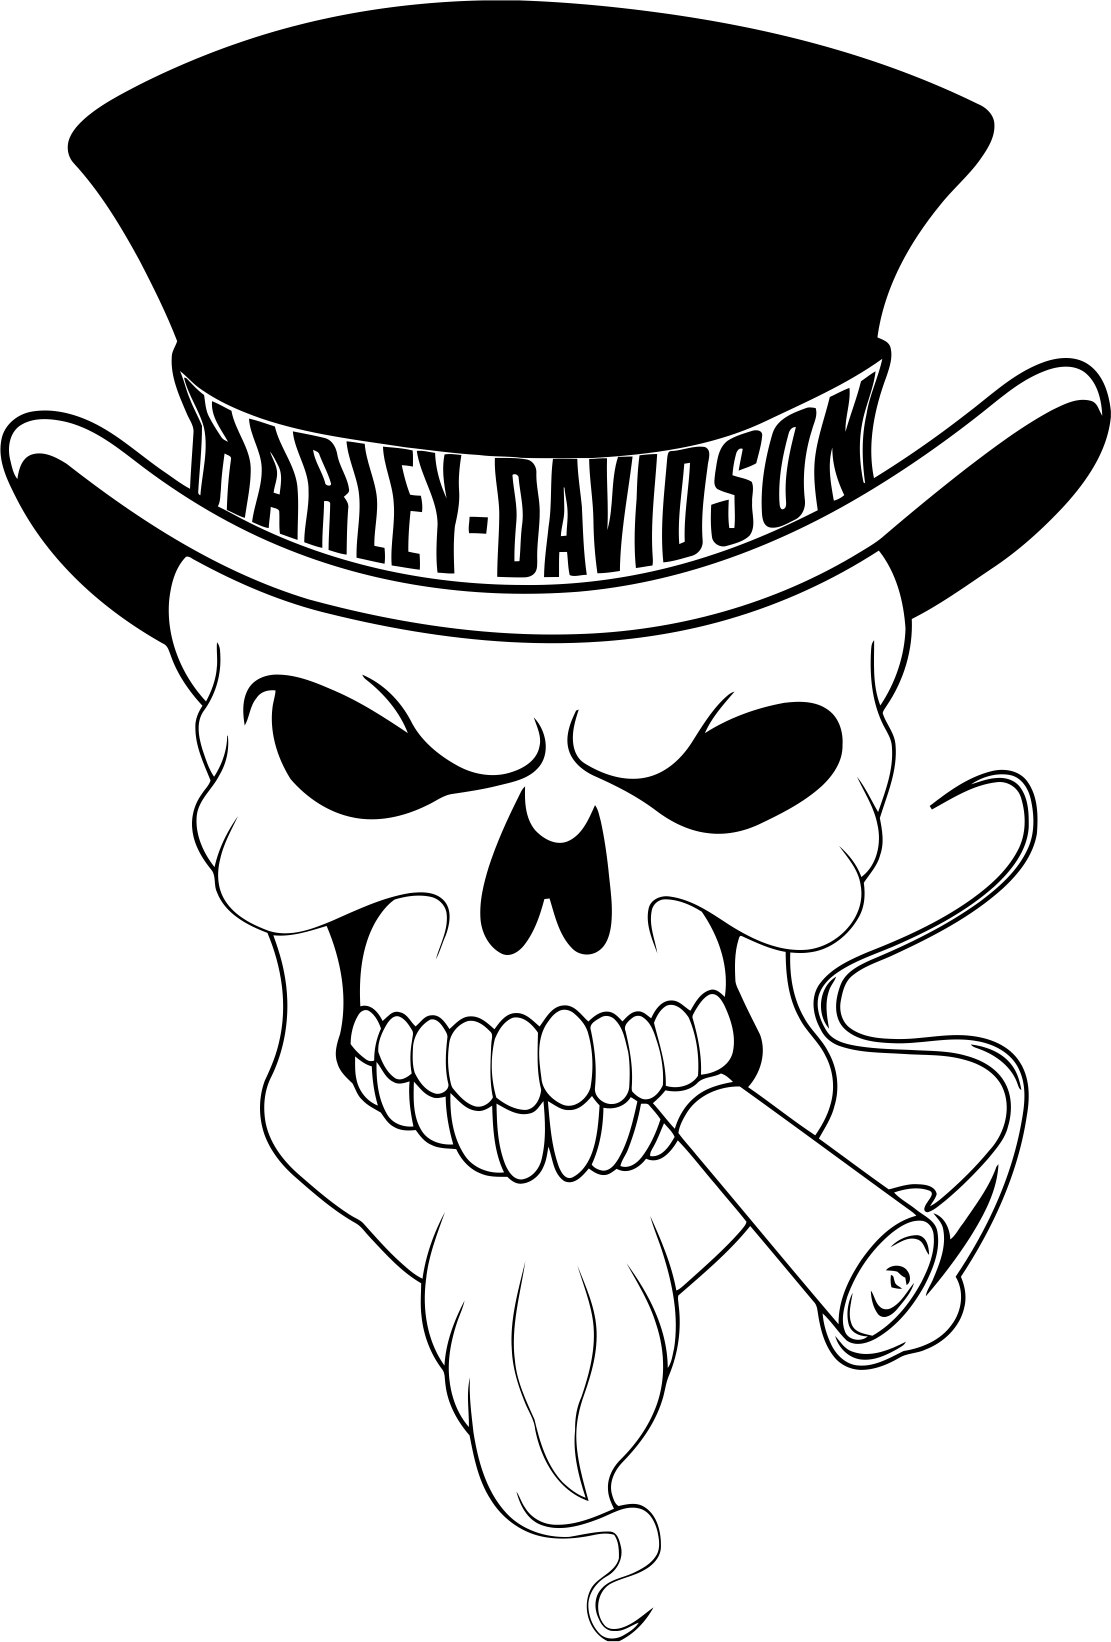 Harley Davidson Logo PNG - harley-davidson-logo-banners harley-davidson-logo-flash  harley-davidson-logo-white harley-davidson-logo-funny harley-davidson-logo-projects  harley-davidson-logo-fonts harley-davidson-logo-chart harley-davidson-logo-coloring  ...